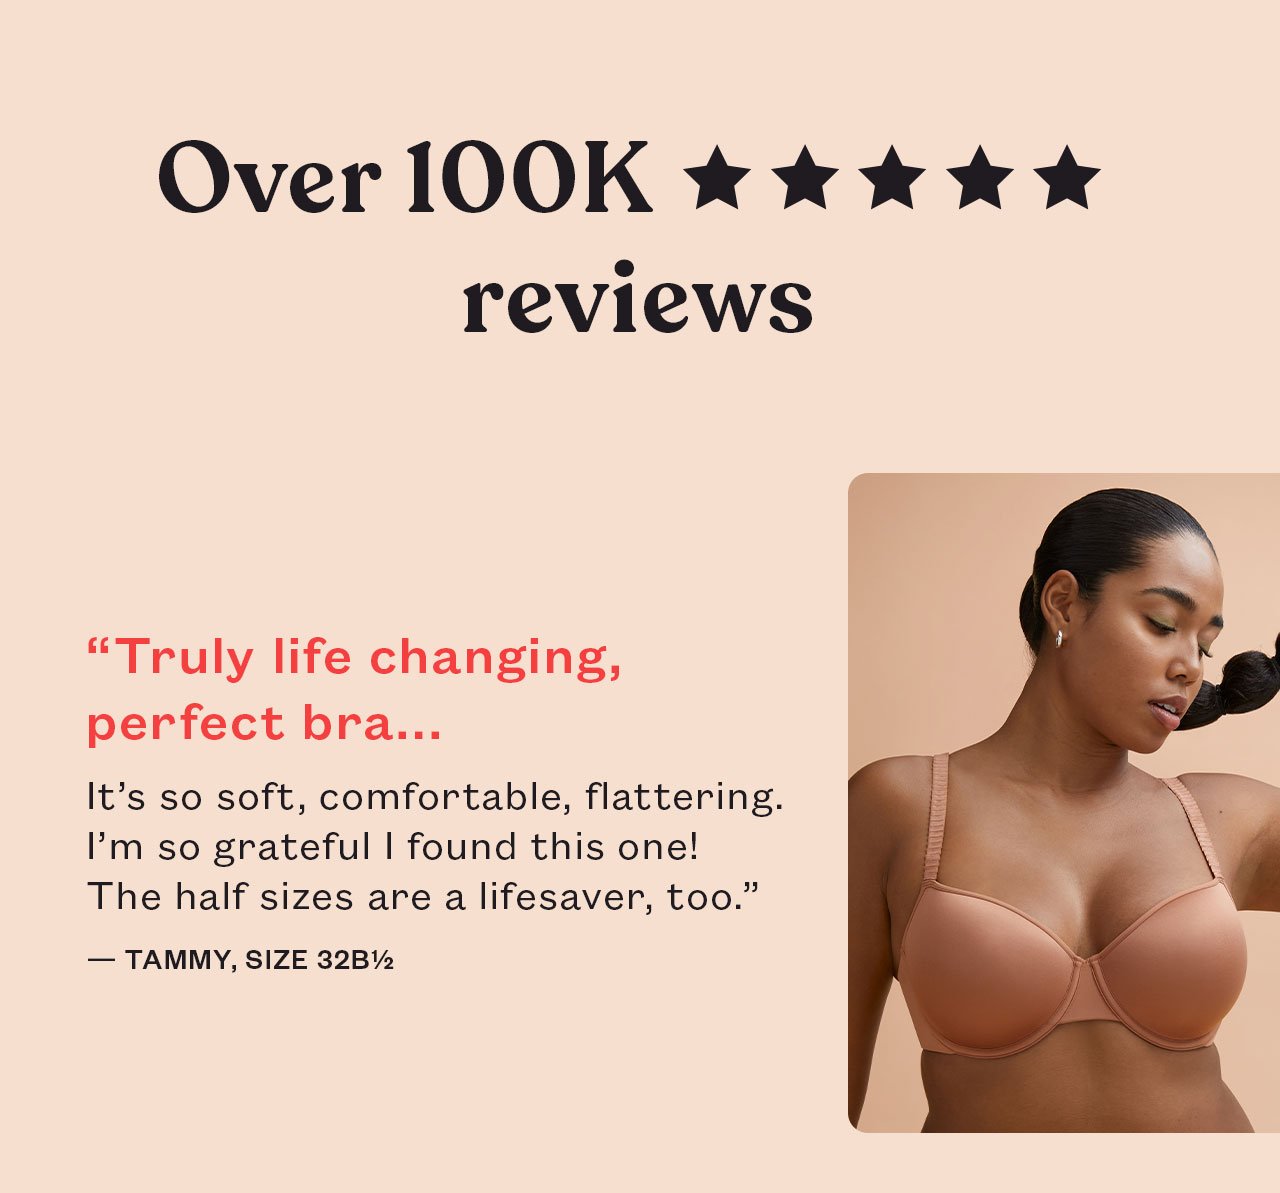 'Truly life changing, perfect bra...'